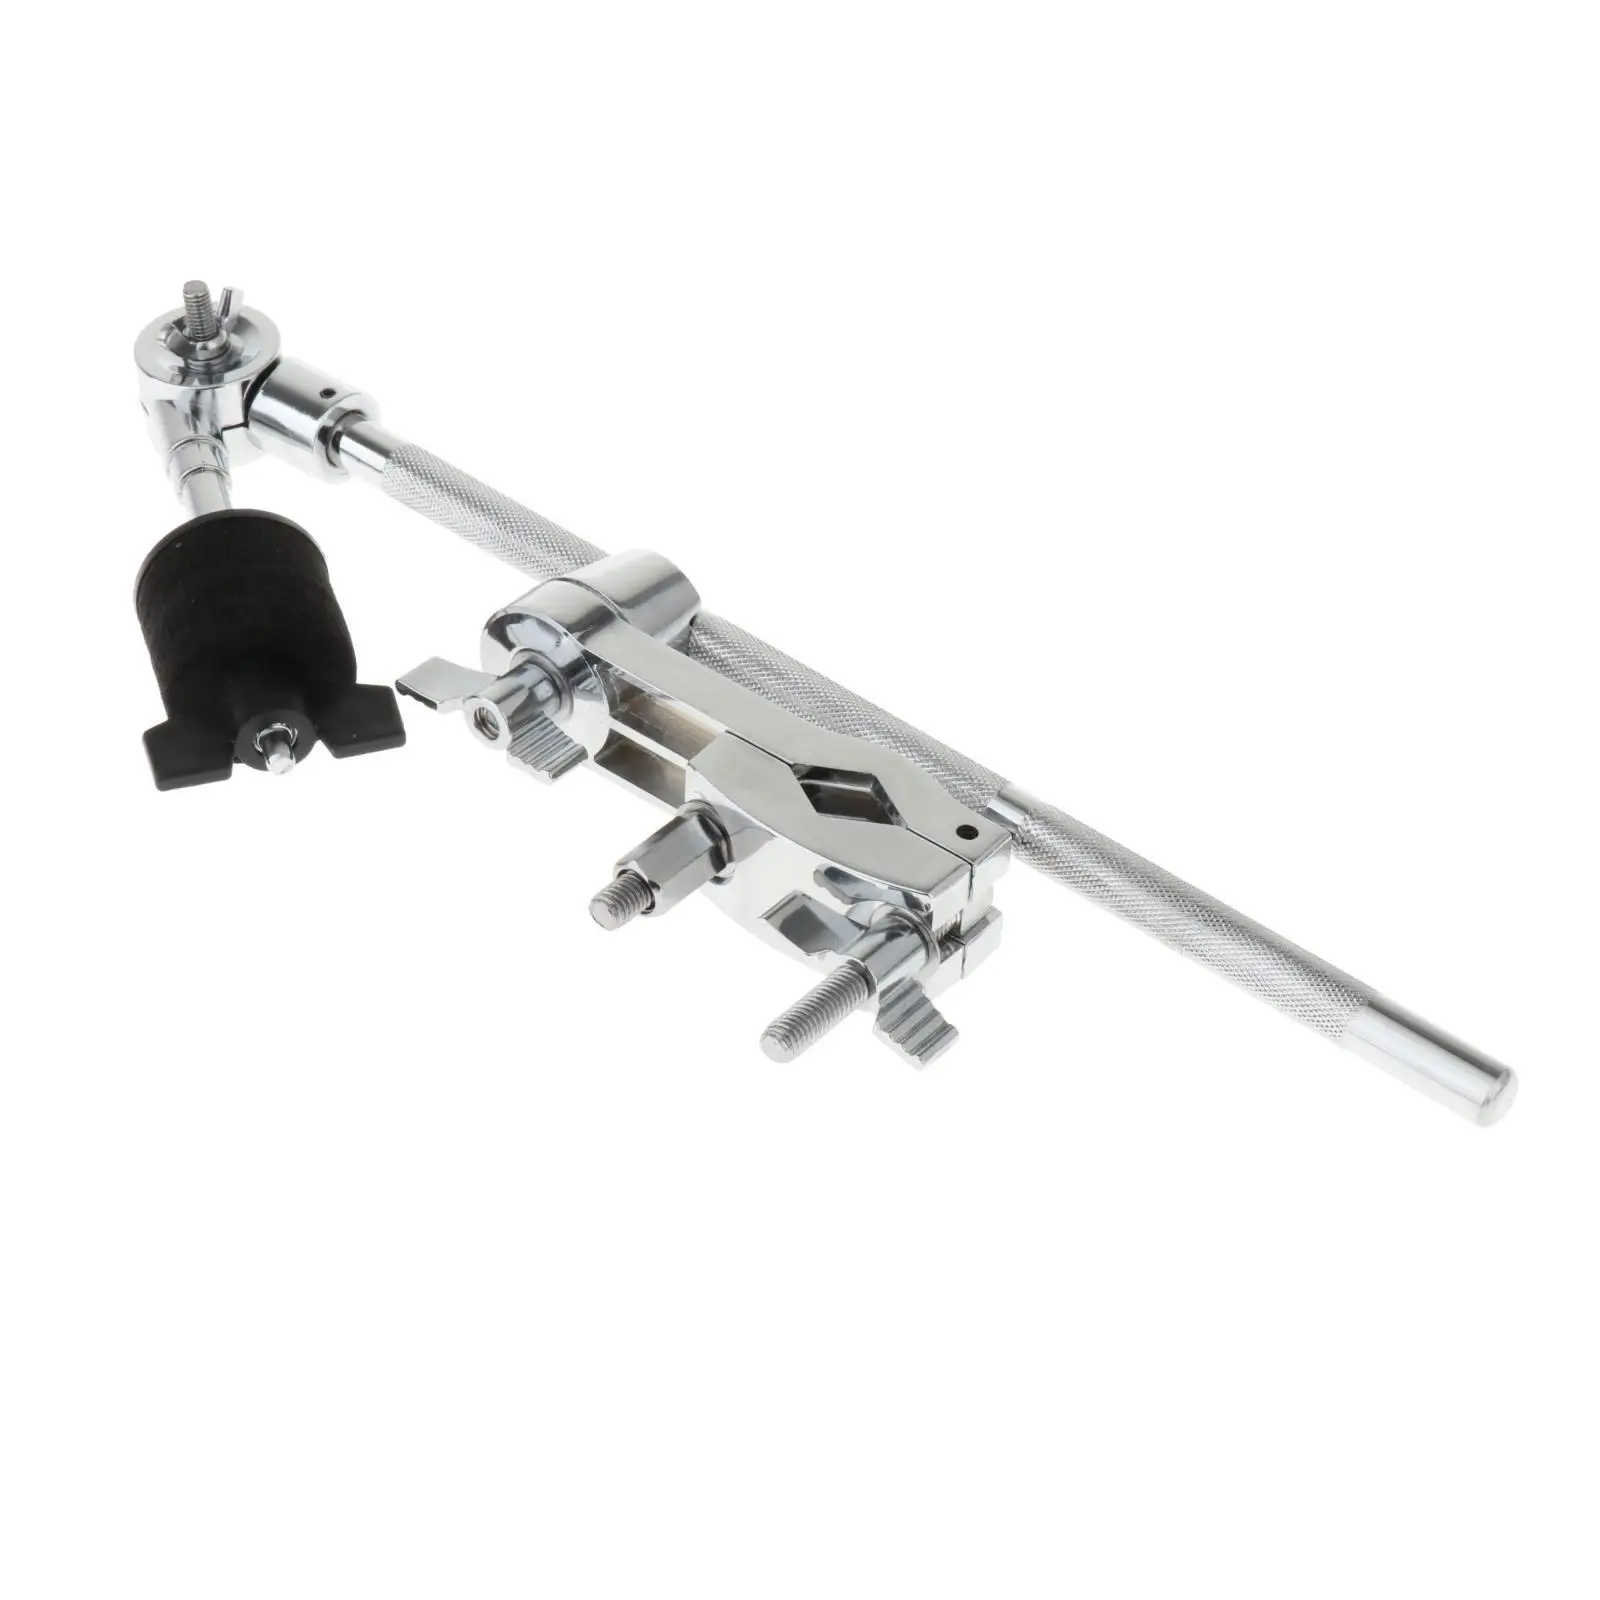 Pdp Cymbal Arm Cymbal Extension Stand Students Percussion Practice Percussion Instrument Accessories 33cm Grabber Cymbal Arm